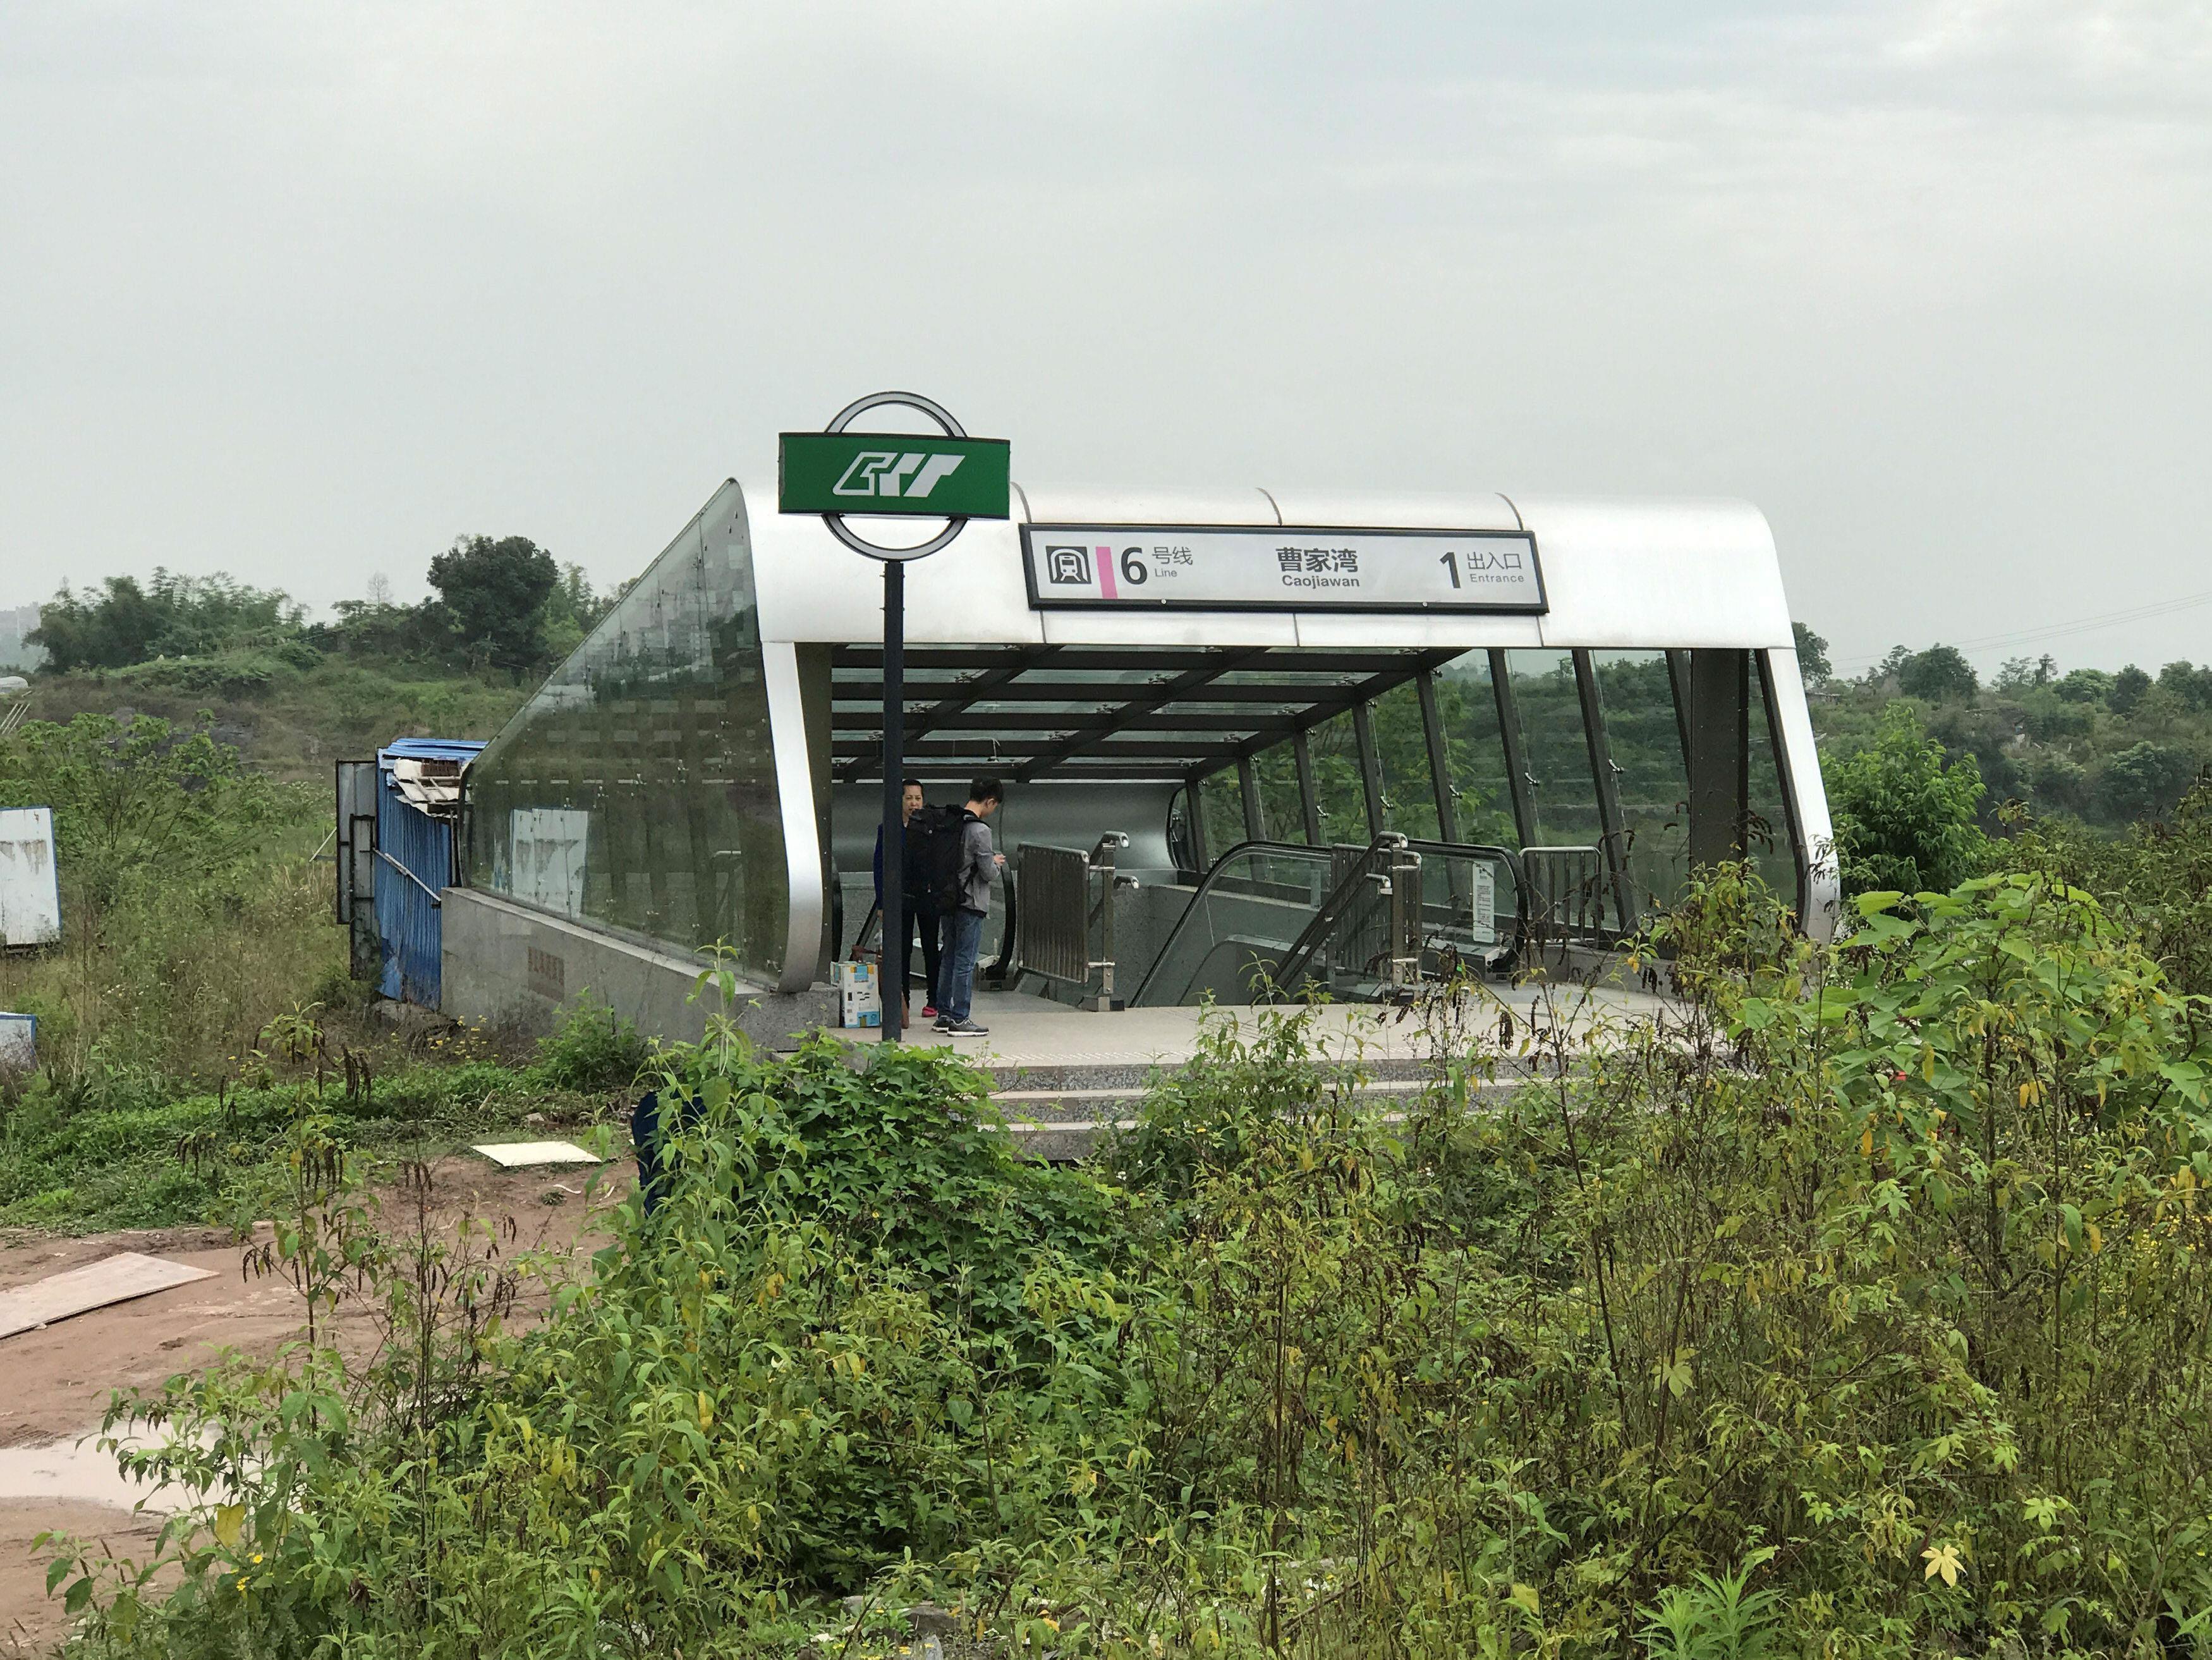 An exit of a subway station currently in operation, is seen in a sparsely populated area in Chongqin